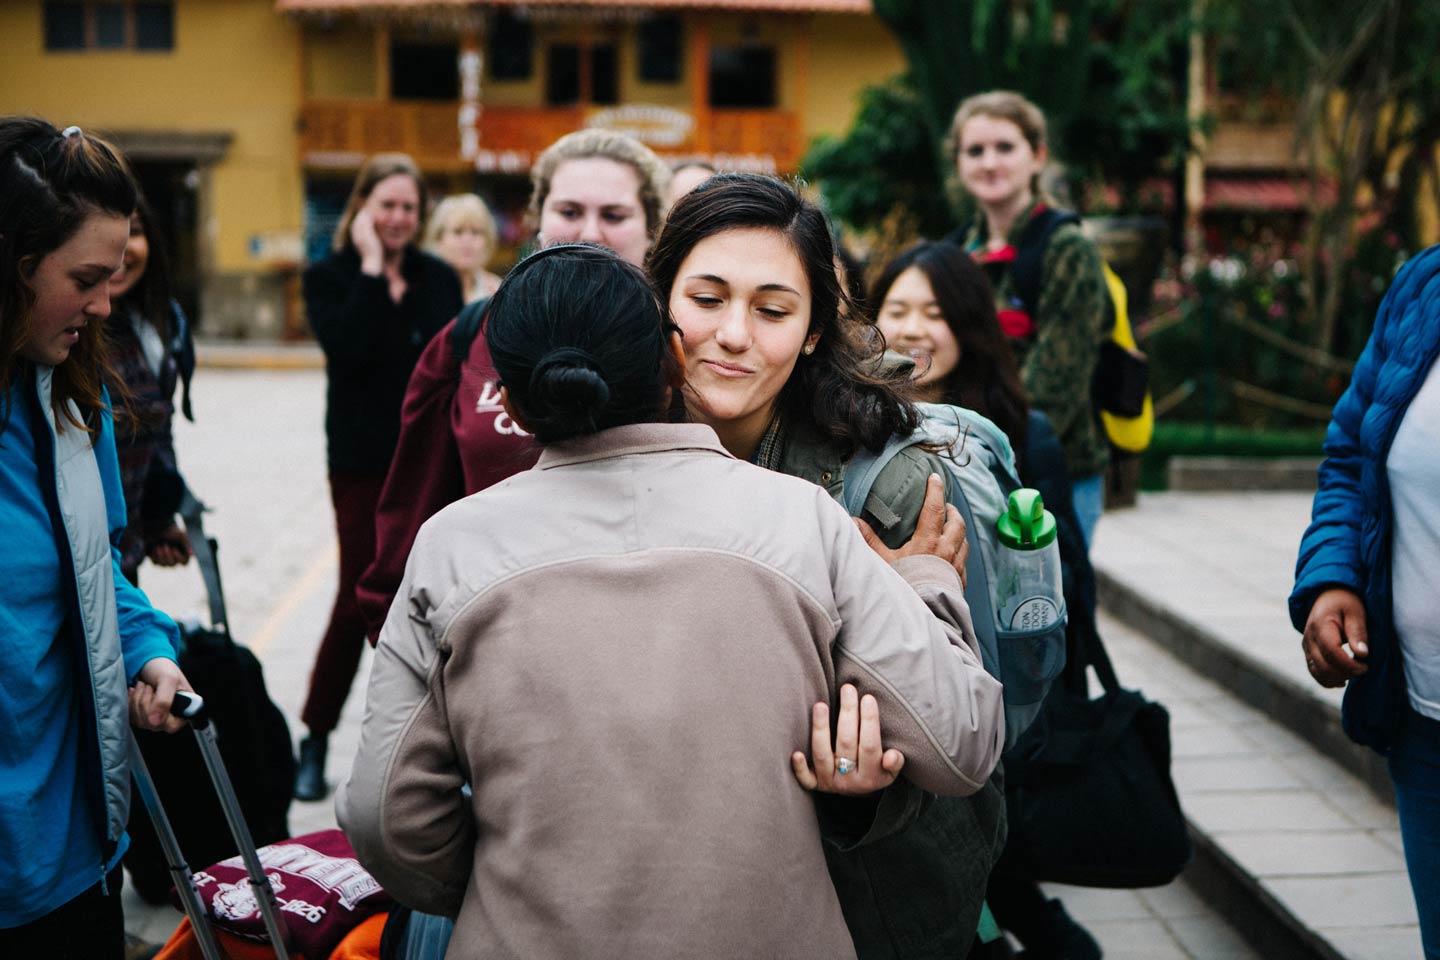 Claire Grunewald in Peru gives a hug during her trip to Peru.